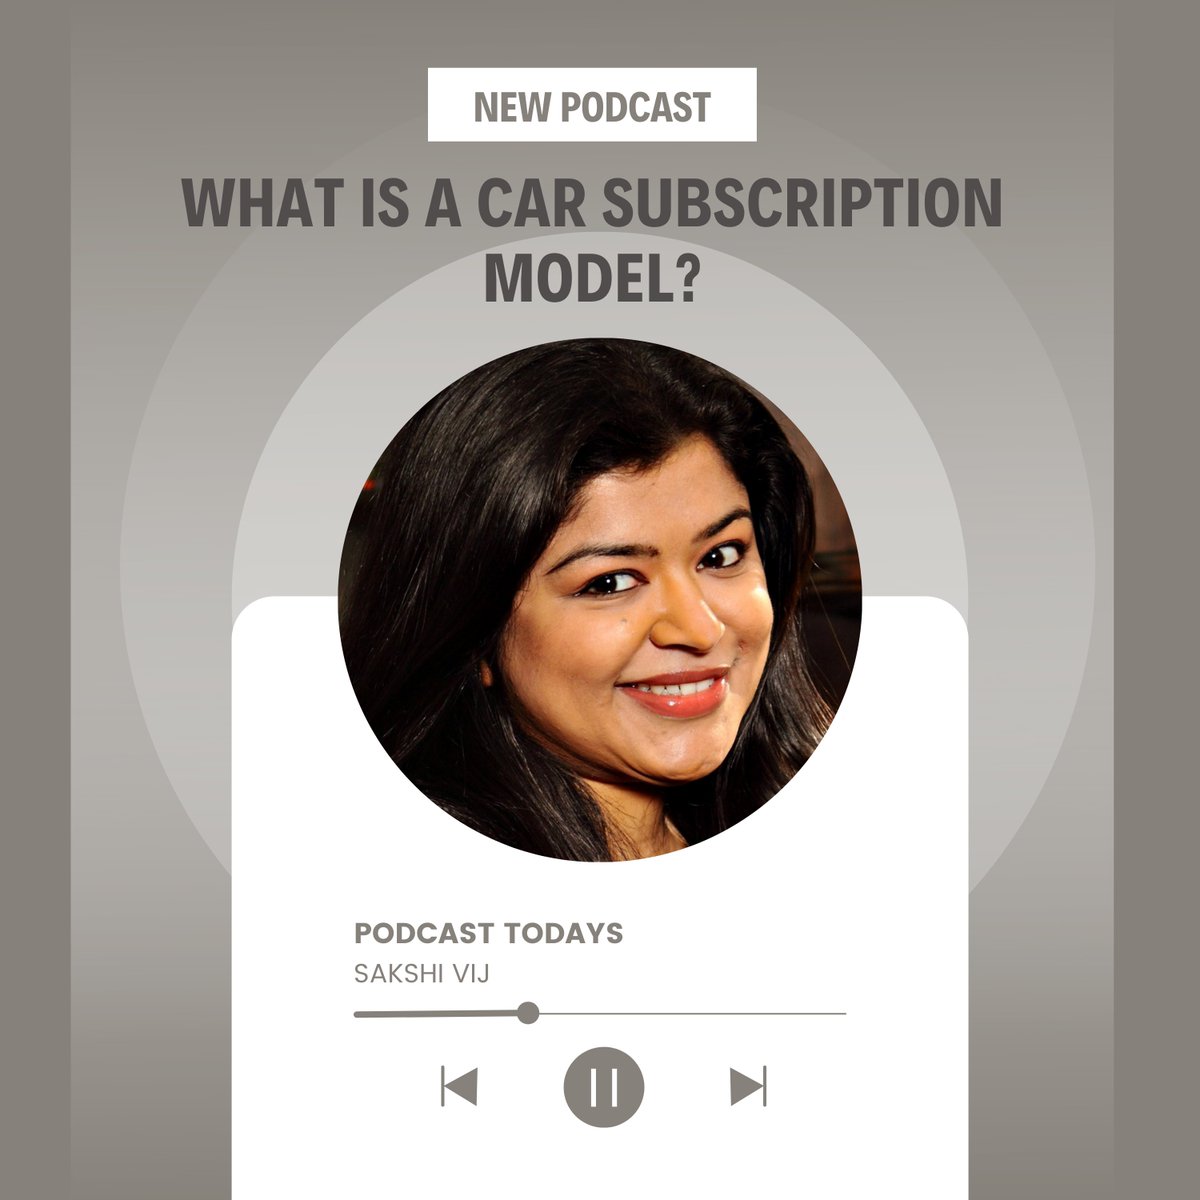 In this episode, Sakshi Vij, Founder & CEO of Myles cars, explains what a car subscription is and how it is the most effective mobility solution for car buyers. Tune in at lnkd.in/dNrj6tCa @sakshivij @HindustanTimes #podcast #businesspodcast #MylesZero #Carsubscription